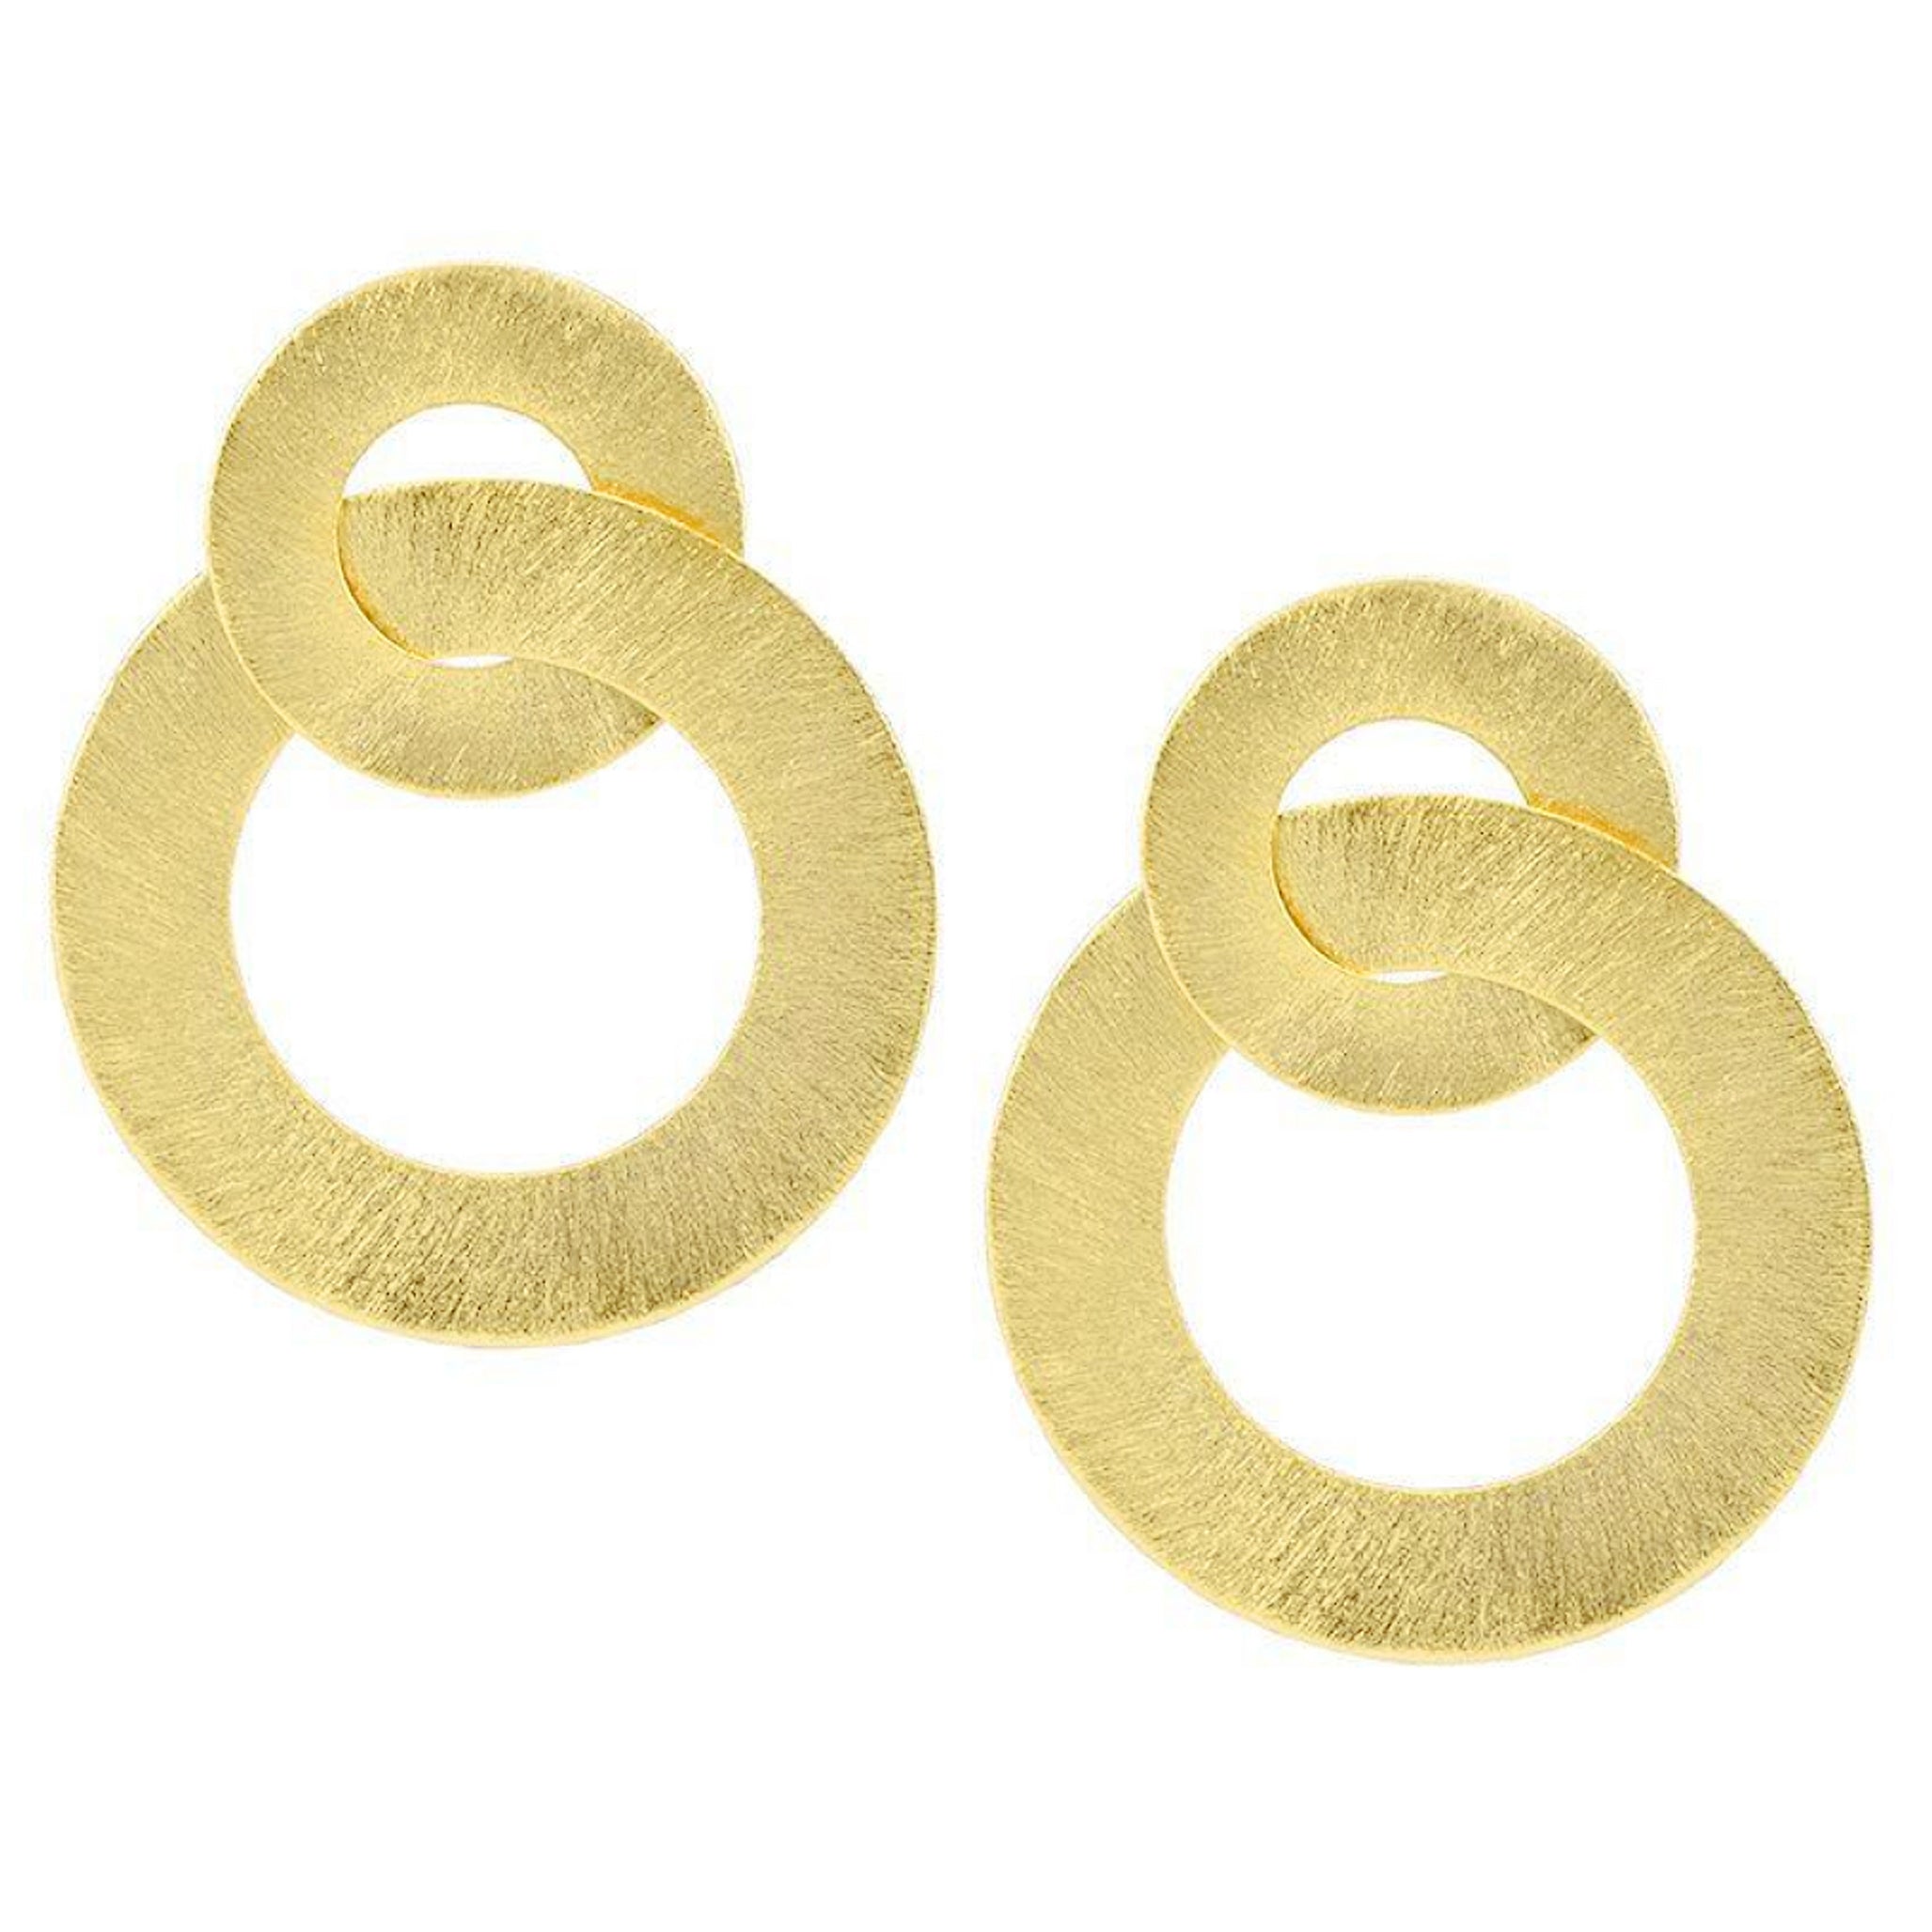 Primary Front View of Sheila Fajl Anna Double Hoop Circle Earrings in Brushed 18K Gold Plated